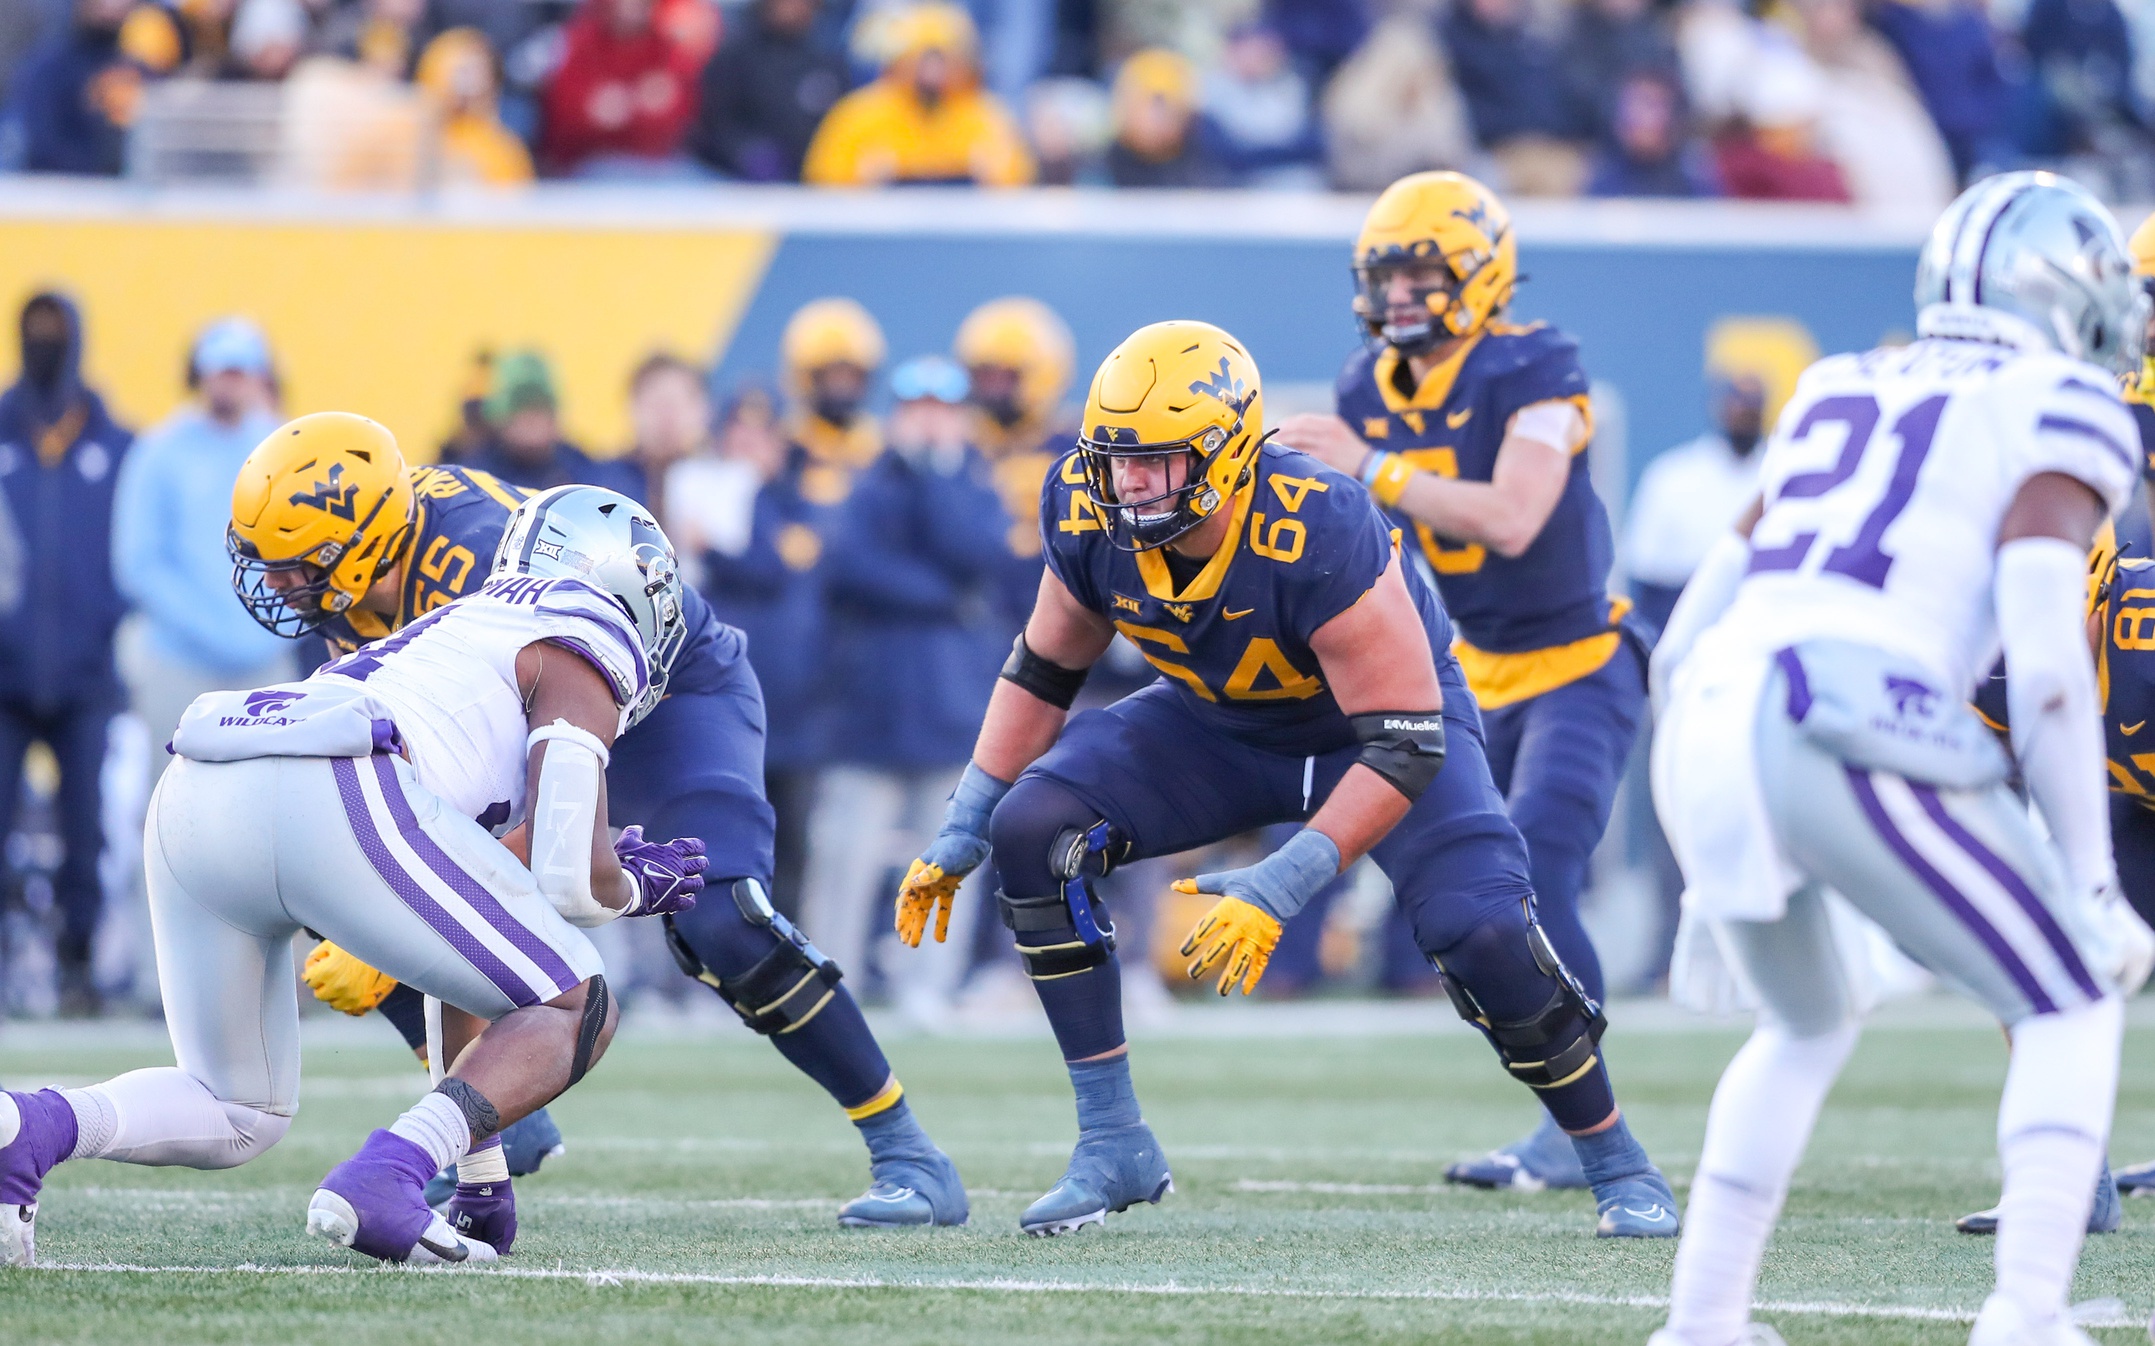 As we continue our preseason coverage for the 2023 West Virginia Mountaineers, we offer our WVU 2023 Offensive Line Preview.